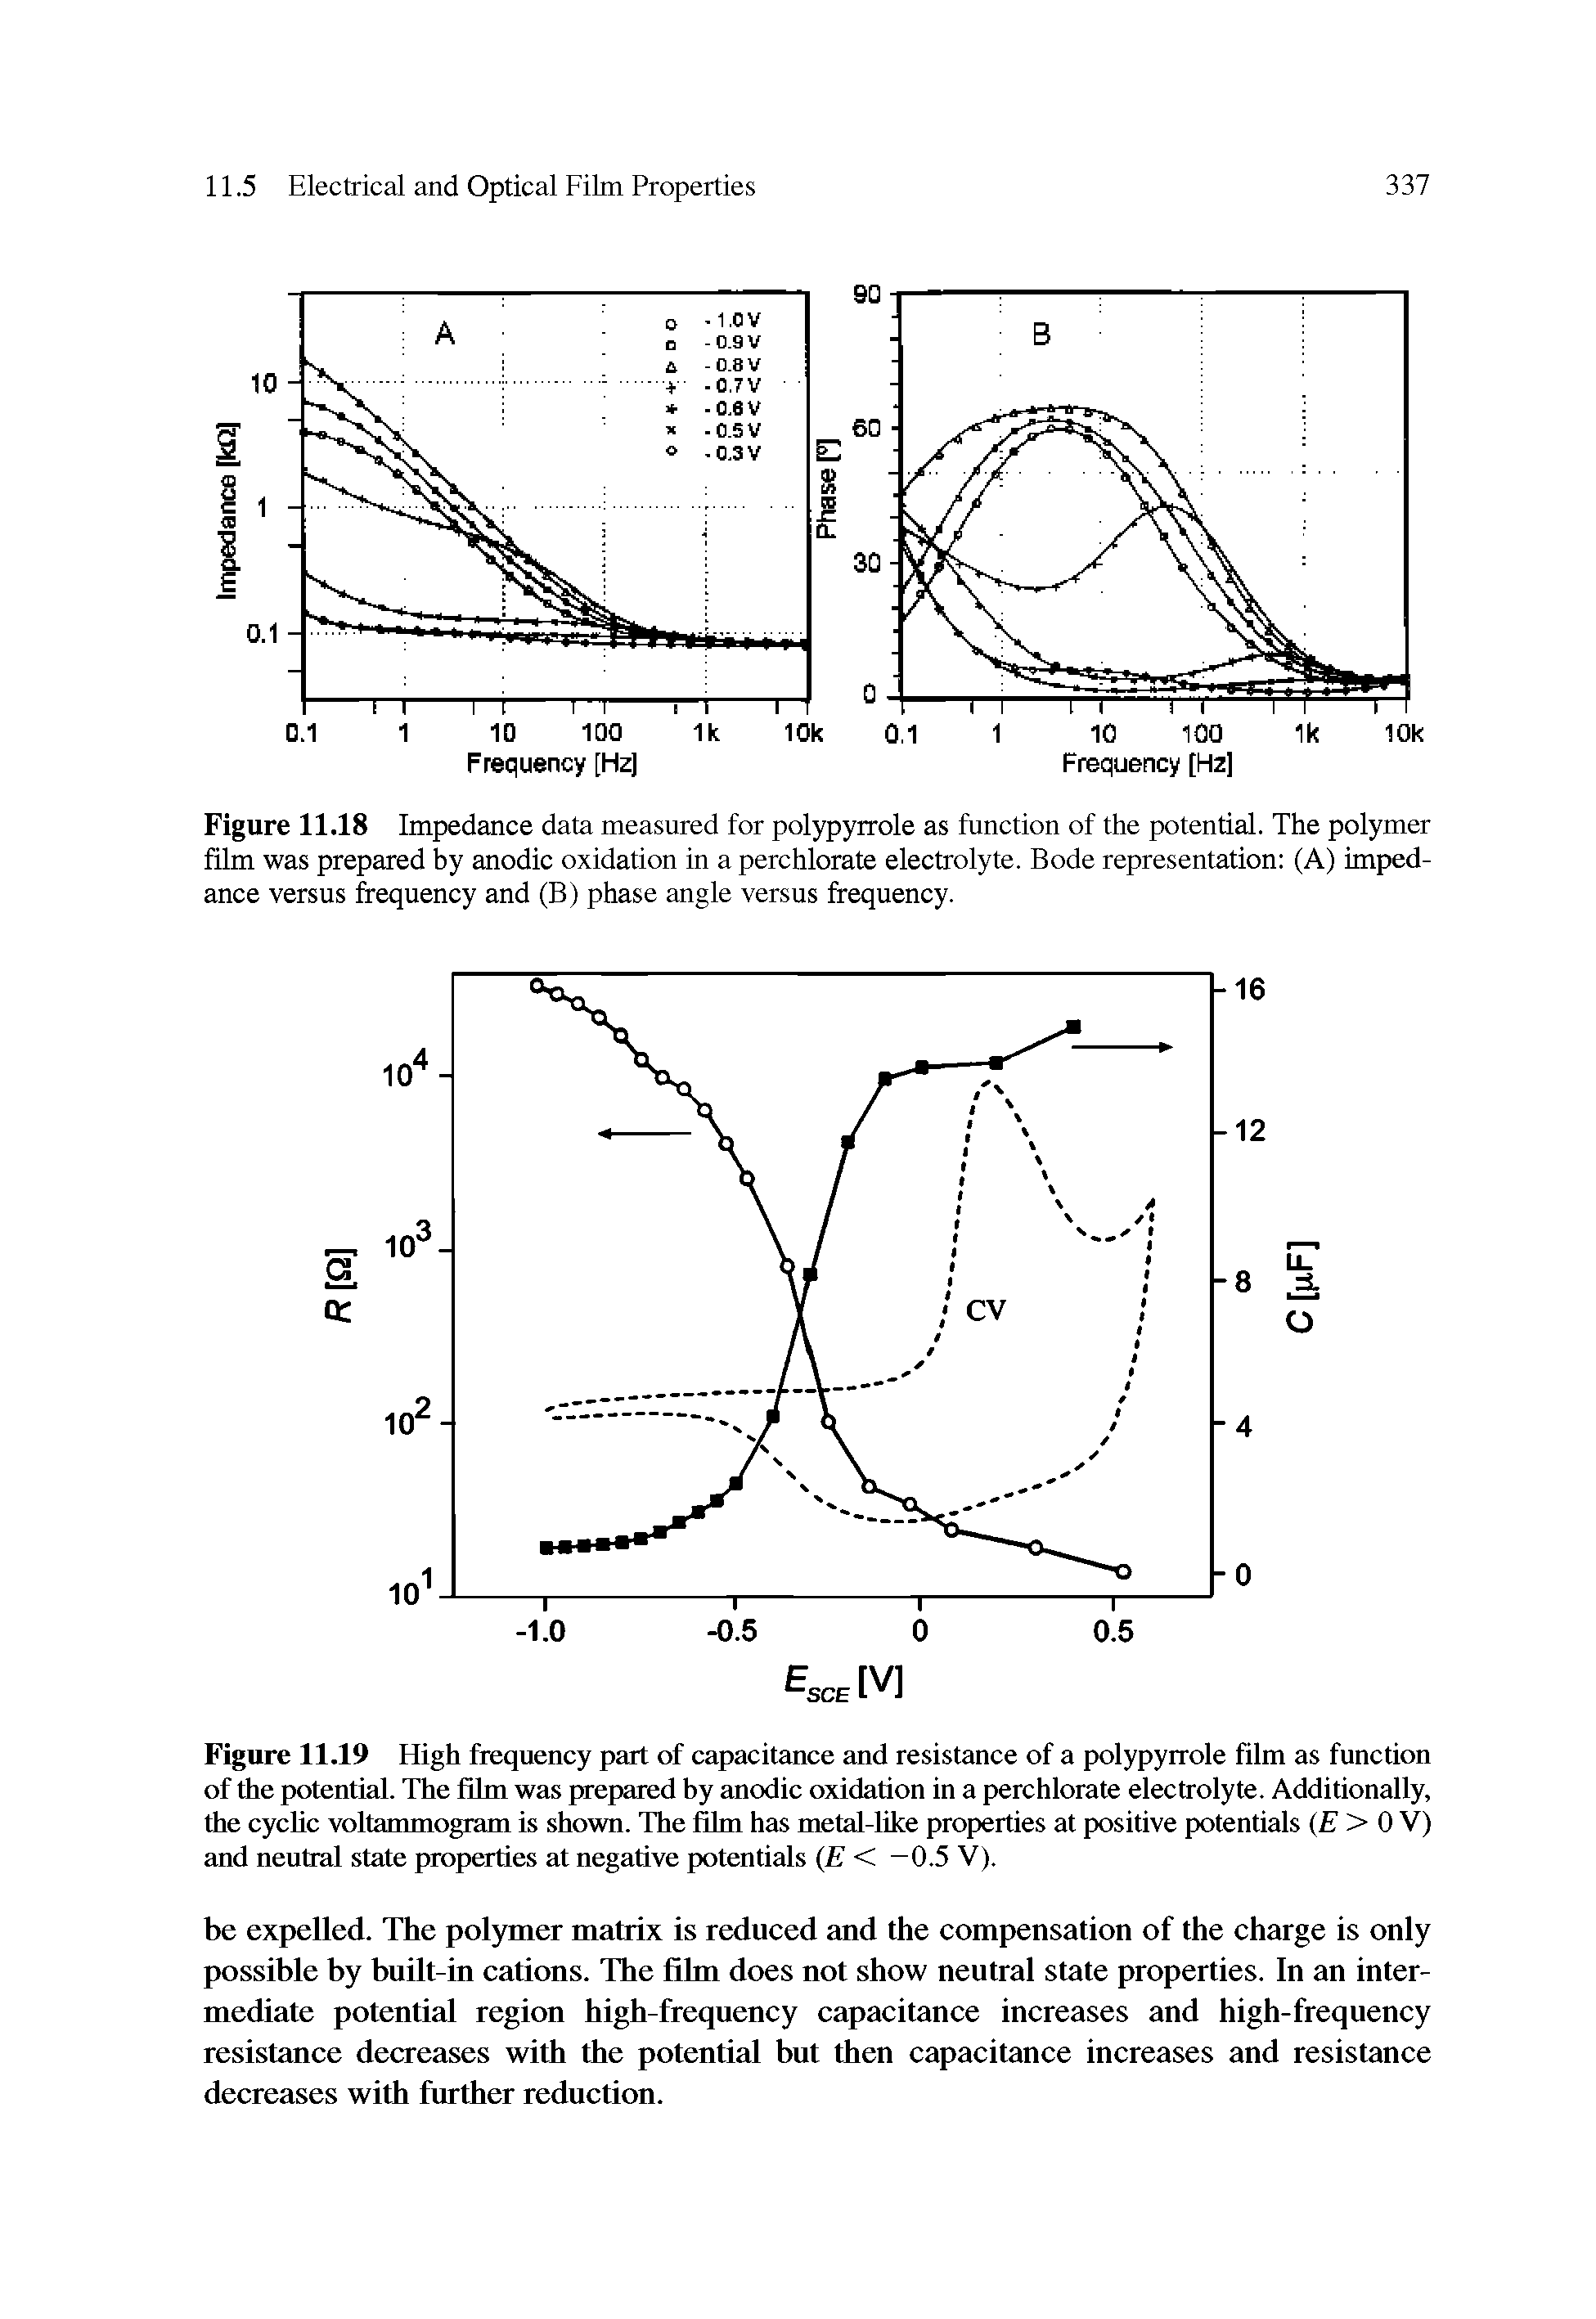 Figure 11.19 High frequency part of capacitance and resistance of a polypyrrole film as function of the potential. The film was prepared by anodic oxidation in a perchlorate electrolyte. Additionally, the cyclic voltammogram is shown. The film has metal-like properties at positive potentials (E> OV) and neutral state properties at negative potentials (E < -0.5 V).